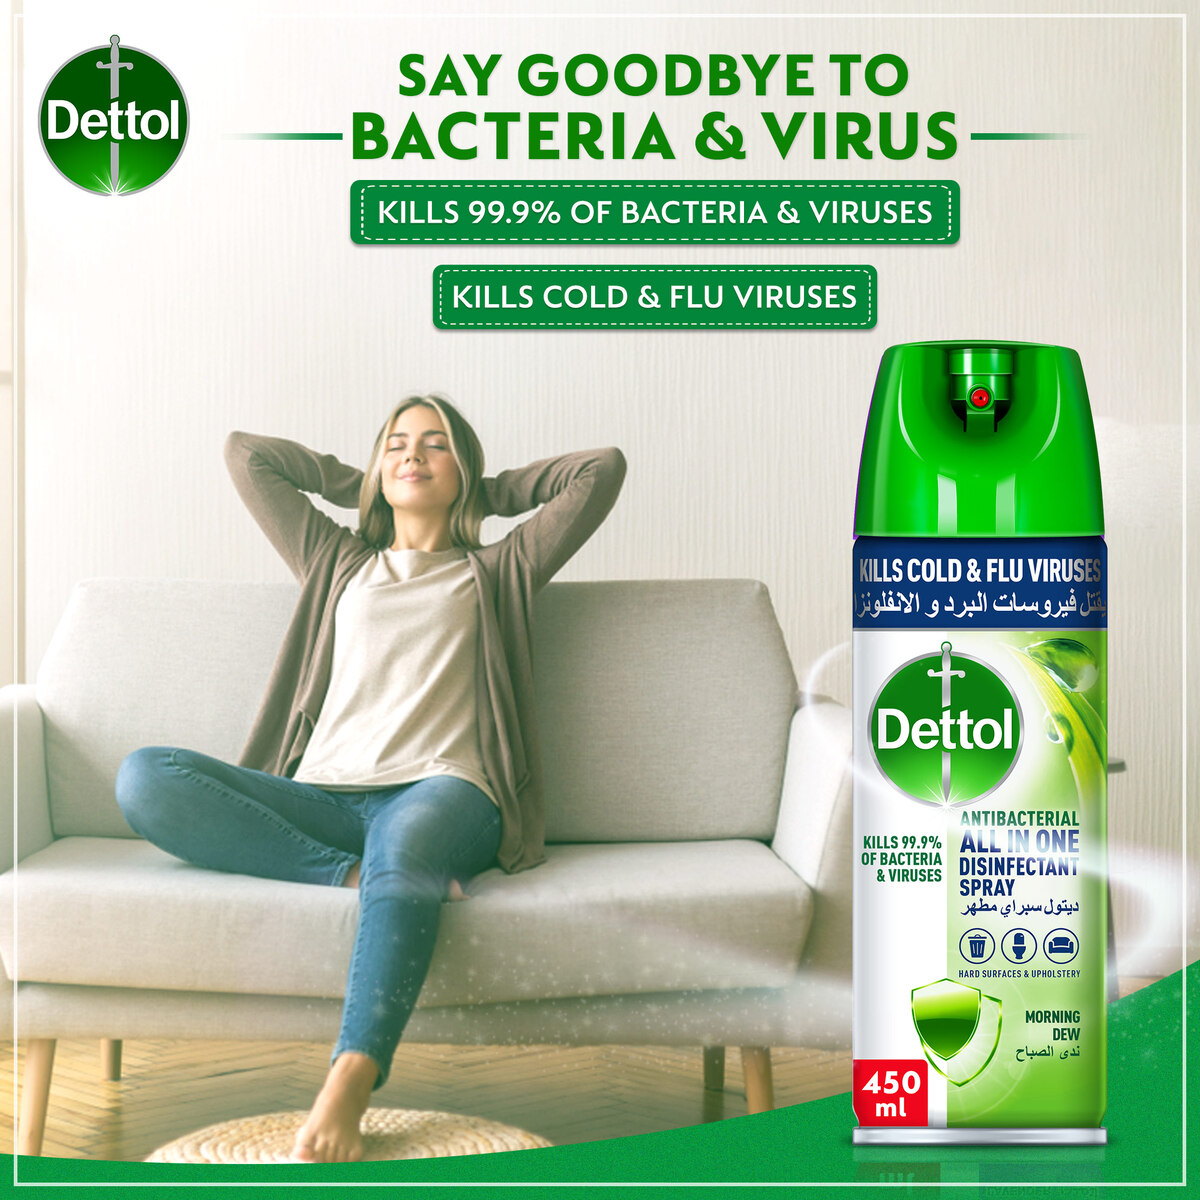 Dettol Morning Dew Antibacterial All in One Disinfectant Spray 450ml